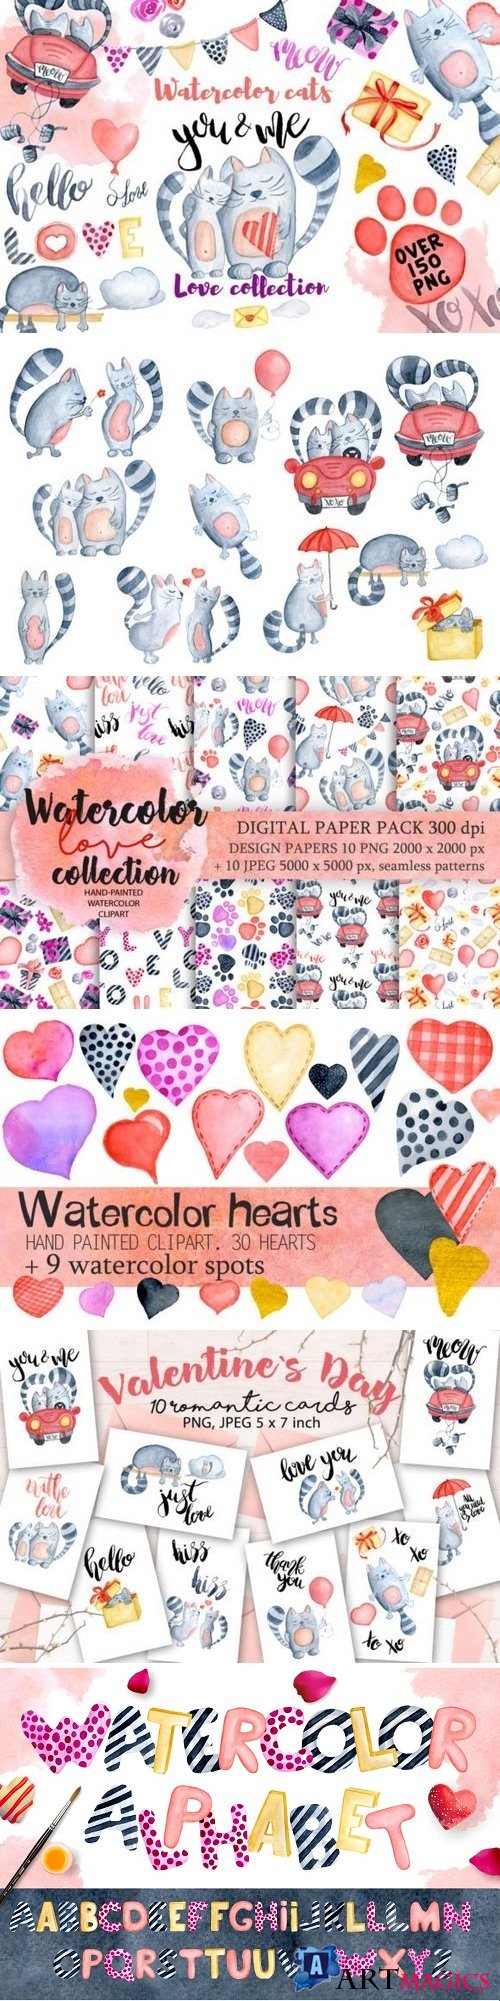 Watercolor Valentines day cats - 1179103